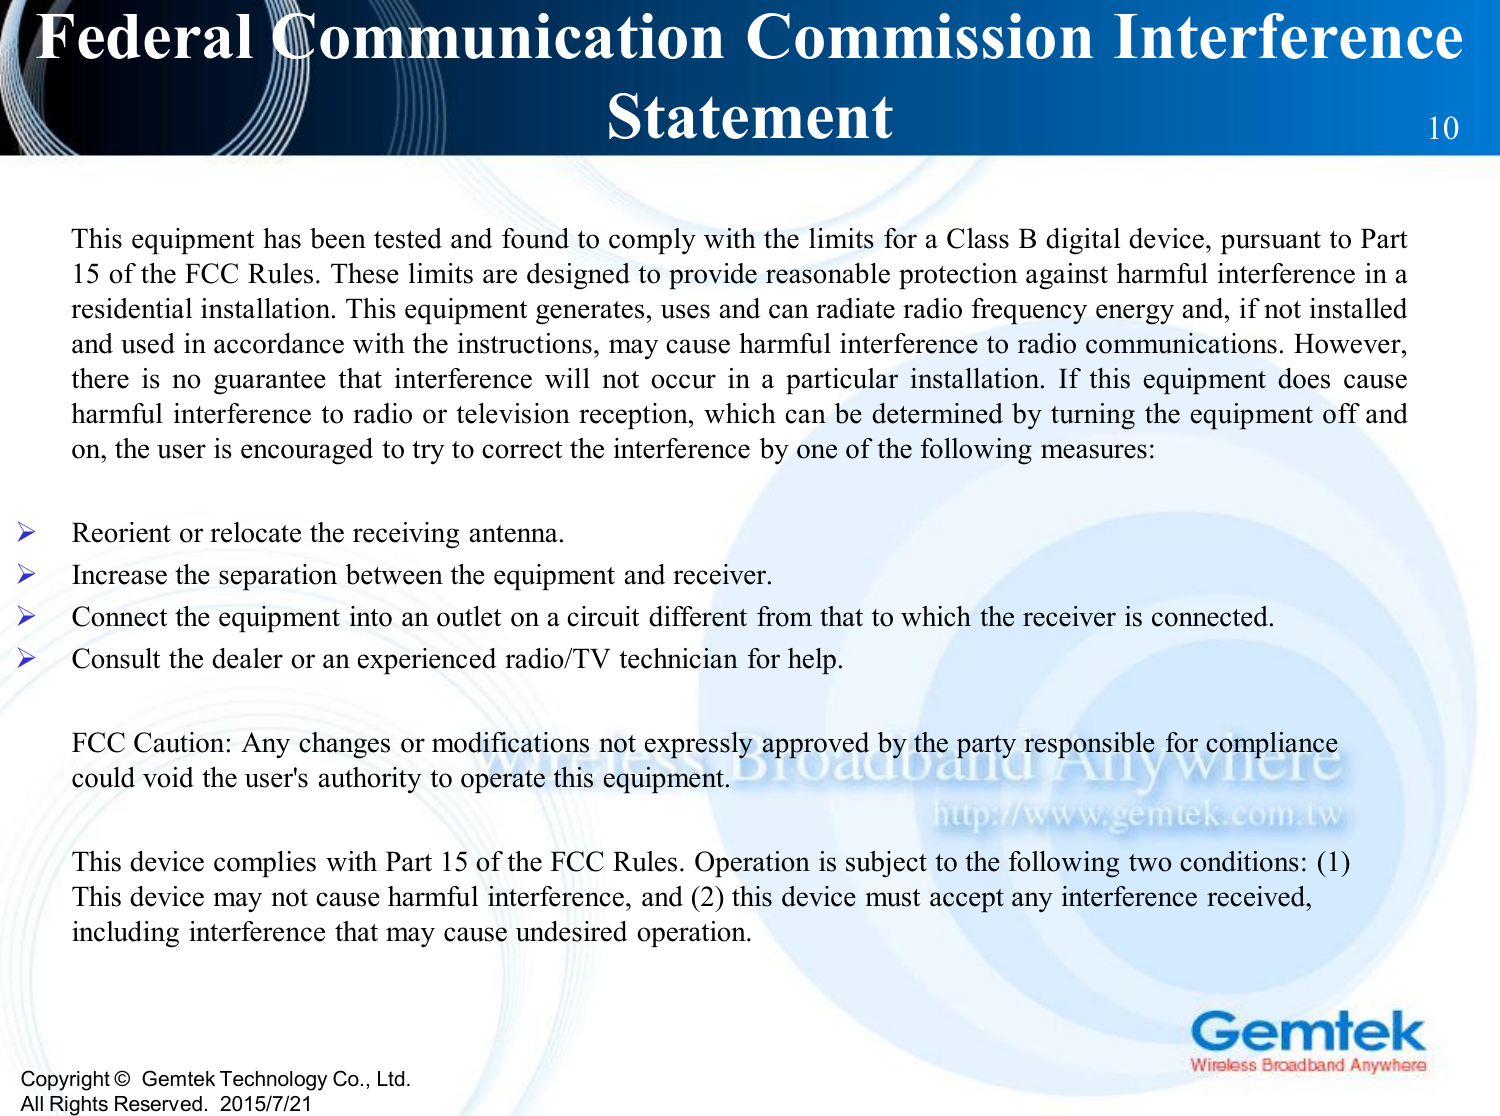 Copyright ©  Gemtek Technology Co., Ltd.All Rights Reserved.  2015/7/21Federal Communication Commission Interference Statement 10This equipment has been tested and found to comply with the limits for a Class B digital device, pursuant to Part15 of the FCC Rules. These limits are designed to provide reasonable protection against harmful interference in aresidential installation. This equipment generates, uses and can radiate radio frequency energy and, if not installedand used in accordance with the instructions, may cause harmful interference to radio communications. However,there is no guarantee that interference will not occur in a particular installation. If this equipment does causeharmful interference to radio or television reception, which can be determined by turning the equipment off andon, the user is encouraged to try to correct the interference by one of the following measures:Reorient or relocate the receiving antenna.Increase the separation between the equipment and receiver.Connect the equipment into an outlet on a circuit different from that to which the receiver is connected.Consult the dealer or an experienced radio/TV technician for help.FCC Caution: Any changes or modifications not expressly approved by the party responsible for compliance could void the user&apos;s authority to operate this equipment.This device complies with Part 15 of the FCC Rules. Operation is subject to the following two conditions: (1) This device may not cause harmful interference, and (2) this device must accept any interference received, including interference that may cause undesired operation.